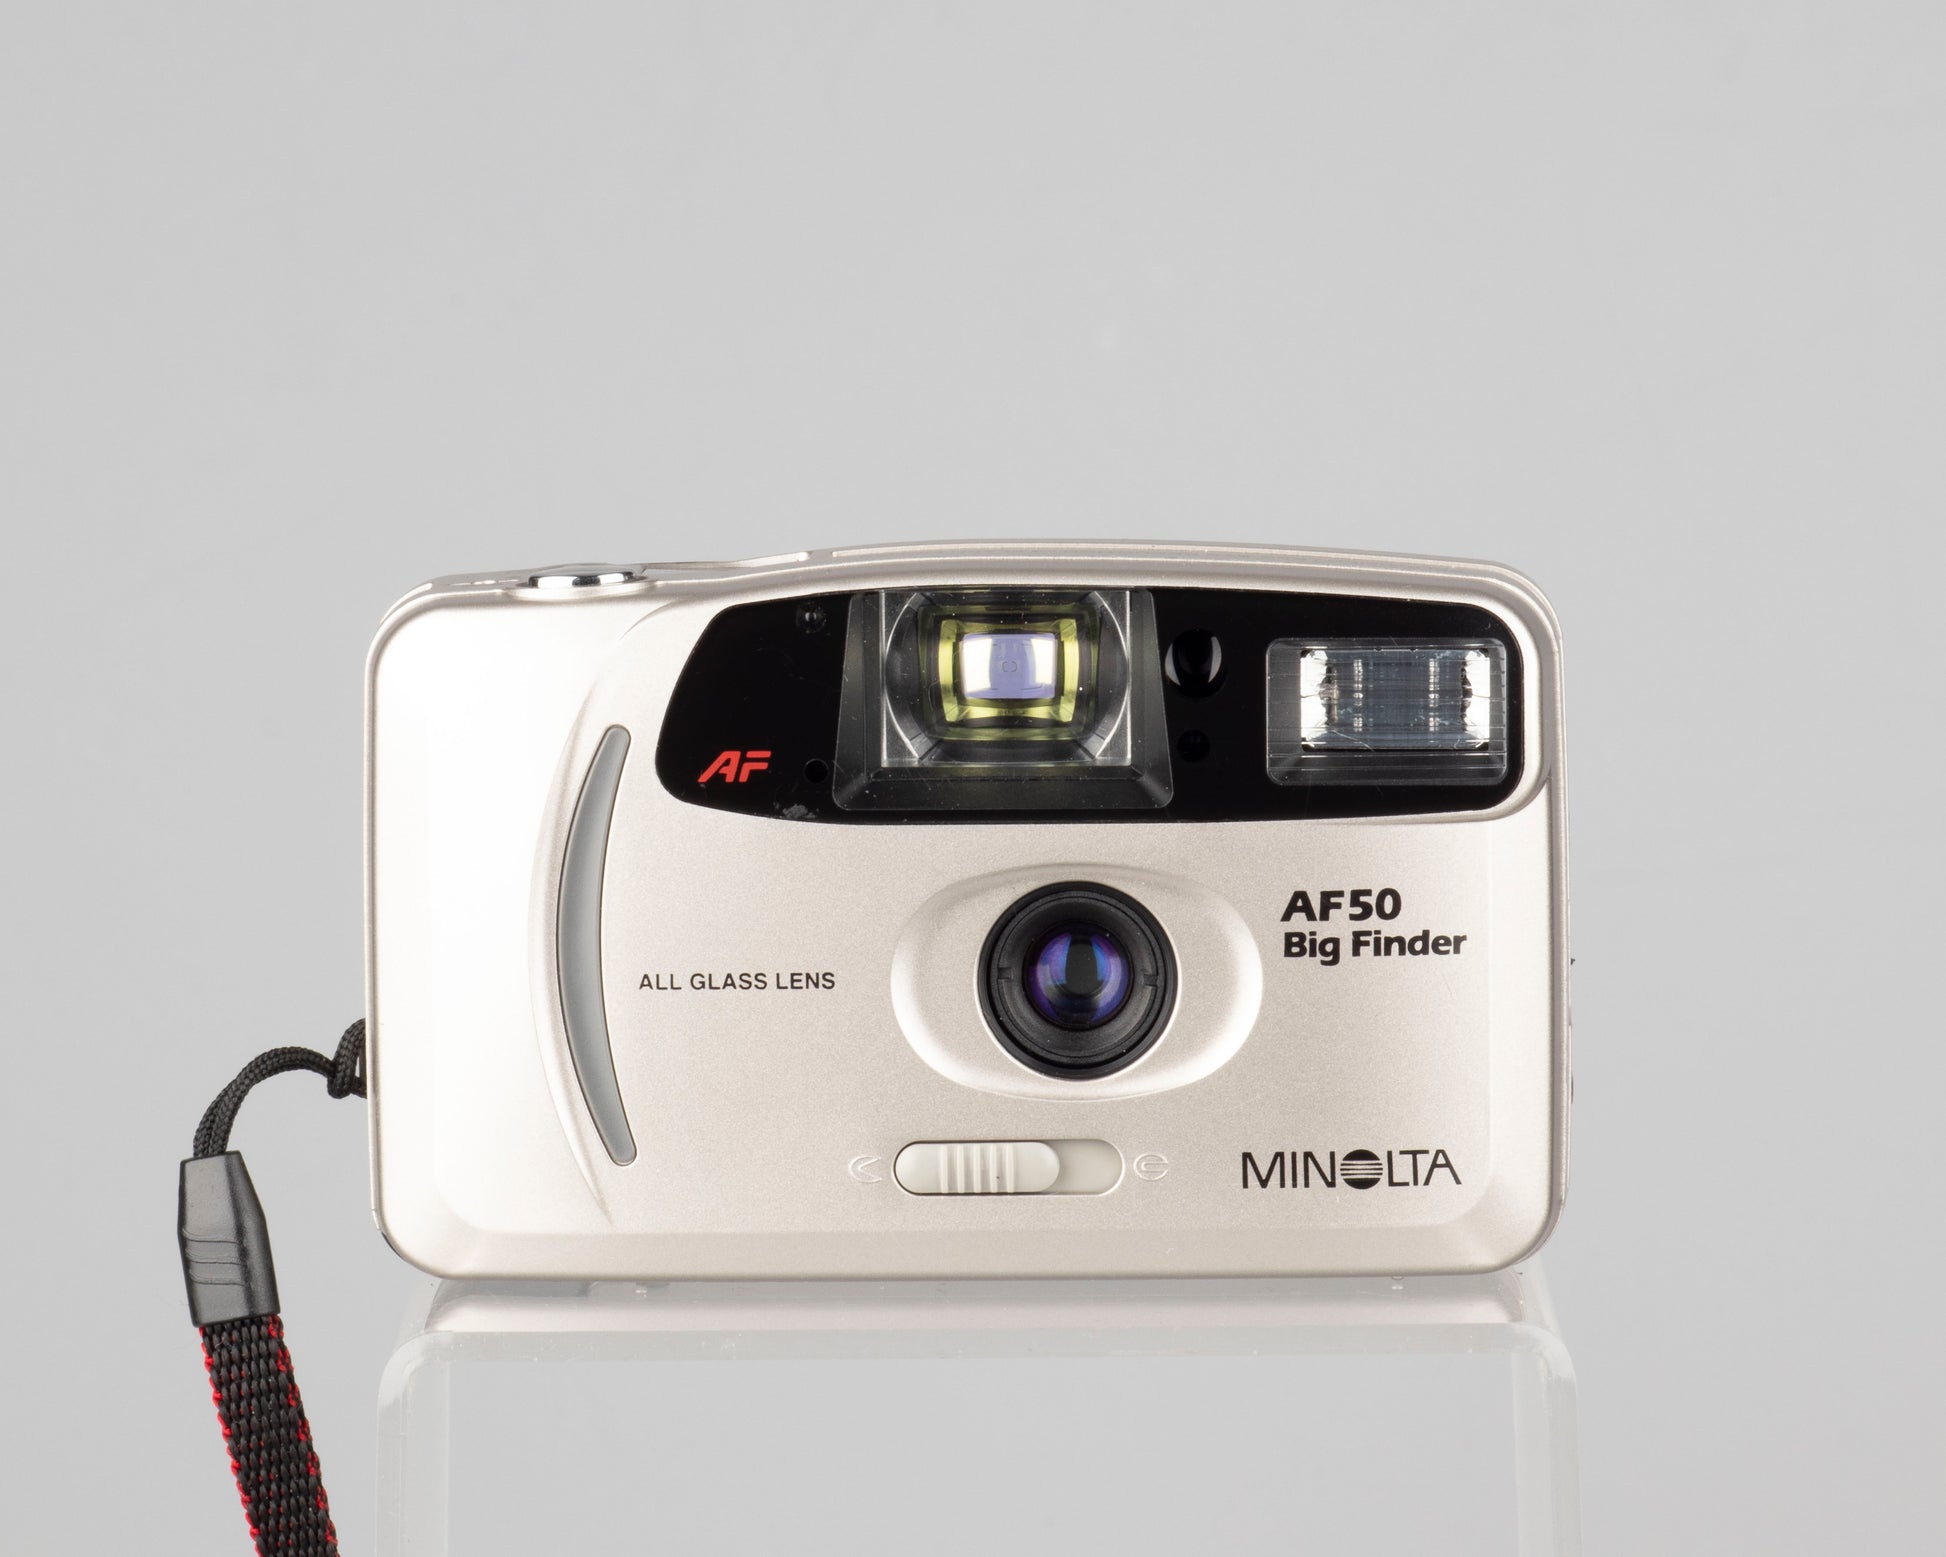 The Minolta AF50 Big Finder is an ultra compact 35mm auto focus camera from the late 1990s